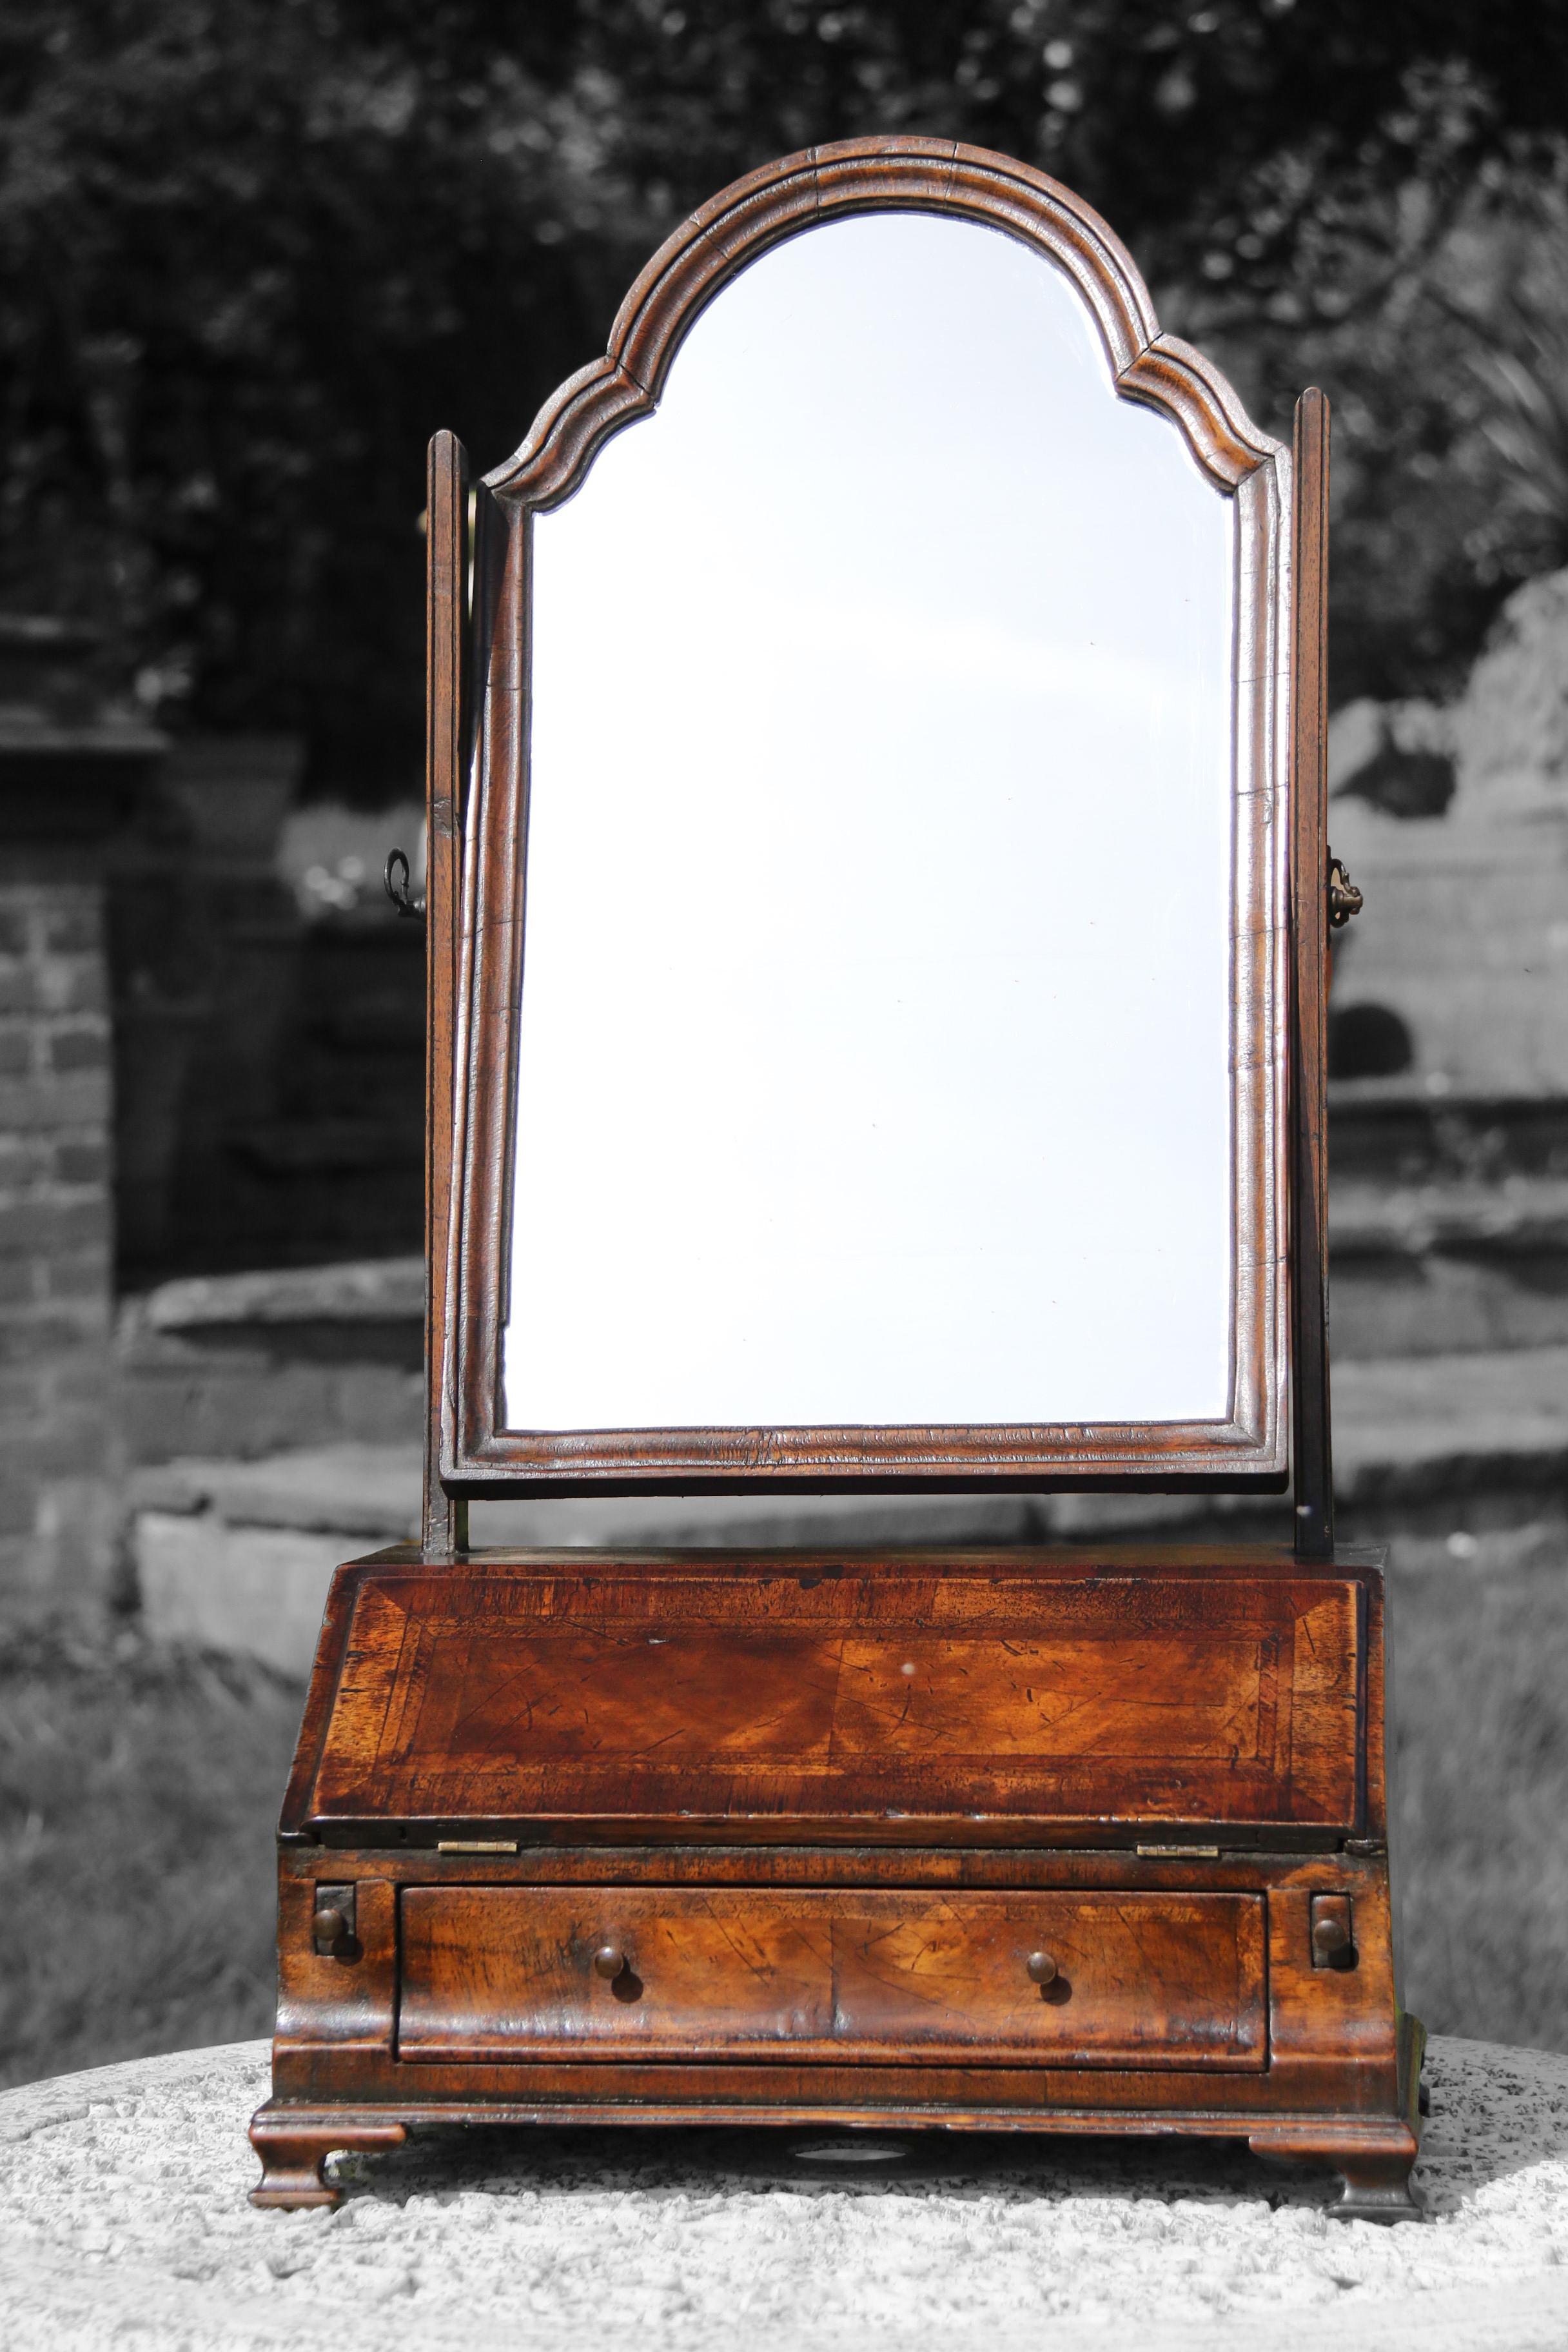 Antique rare early 18th century style figured walnut table mirror English C 1860 For Sale 7